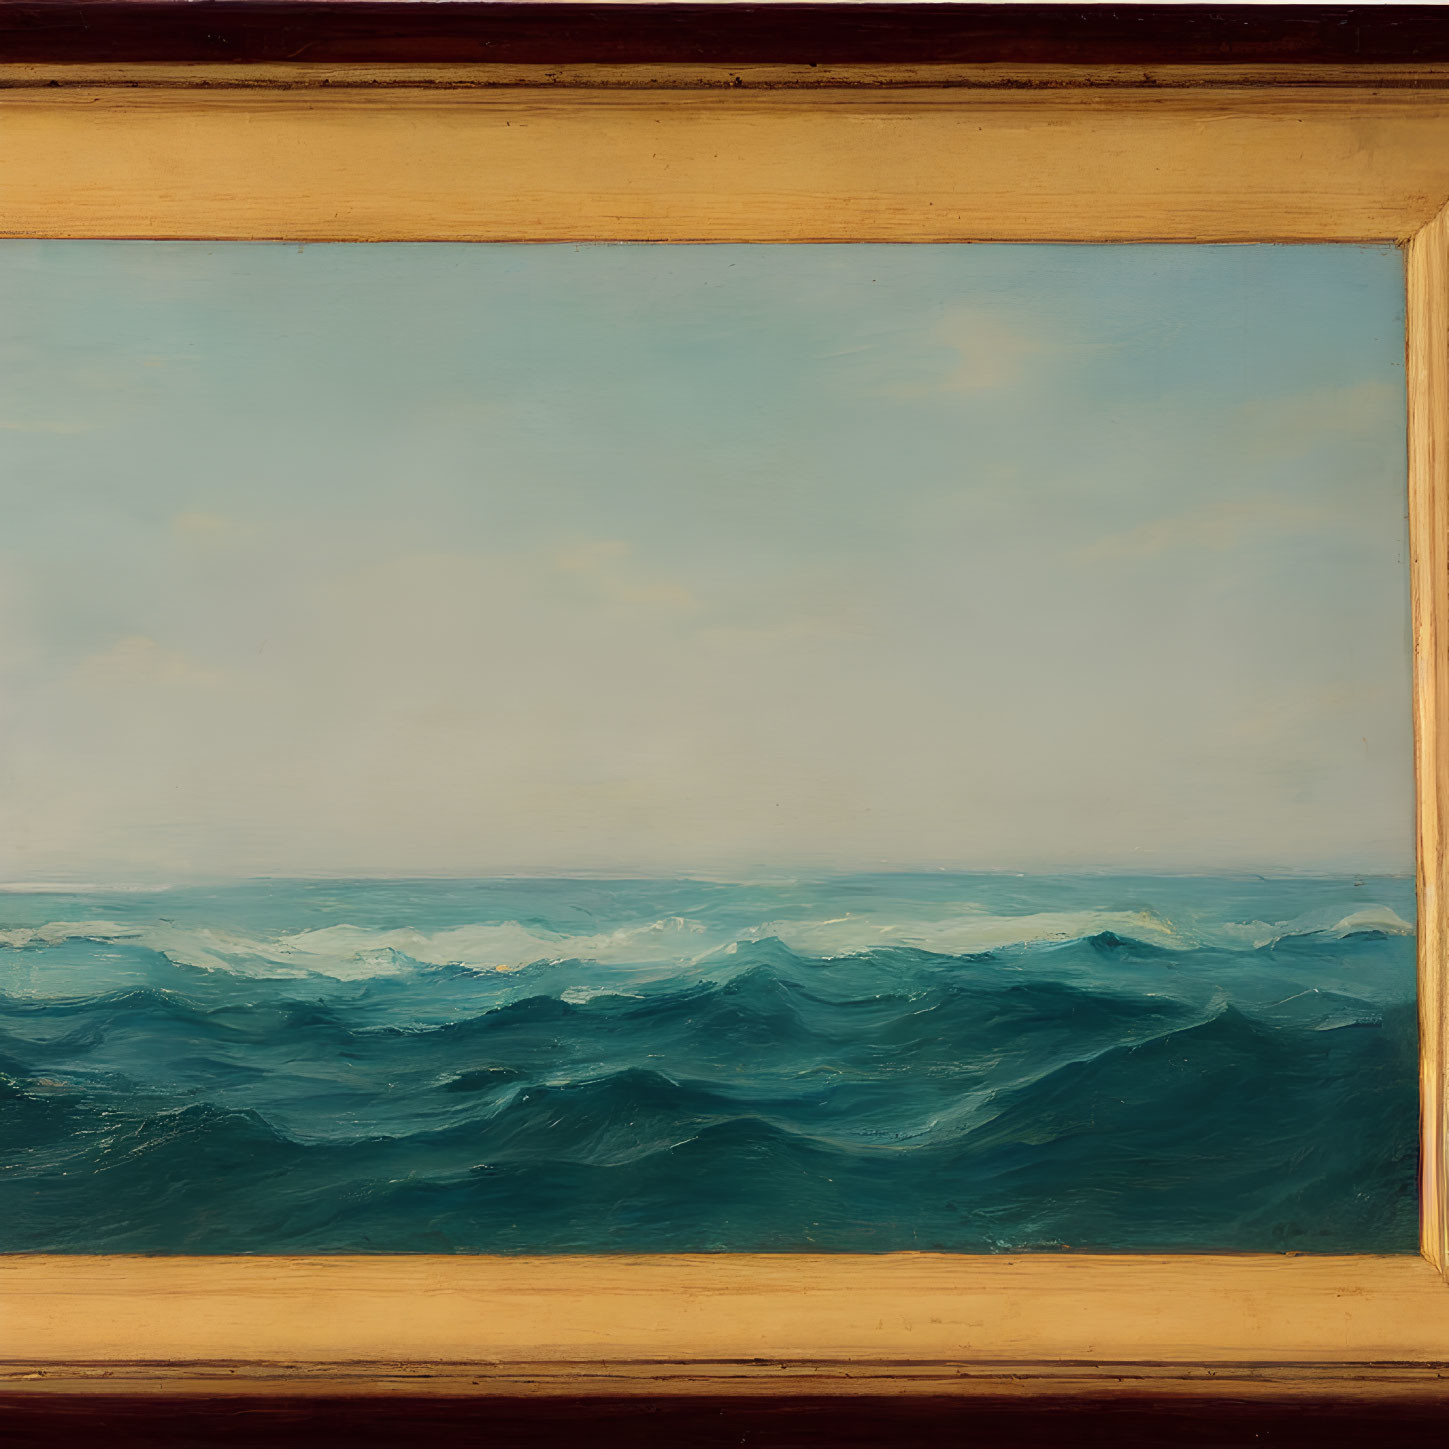 Tranquil ocean waves painting in wooden frame